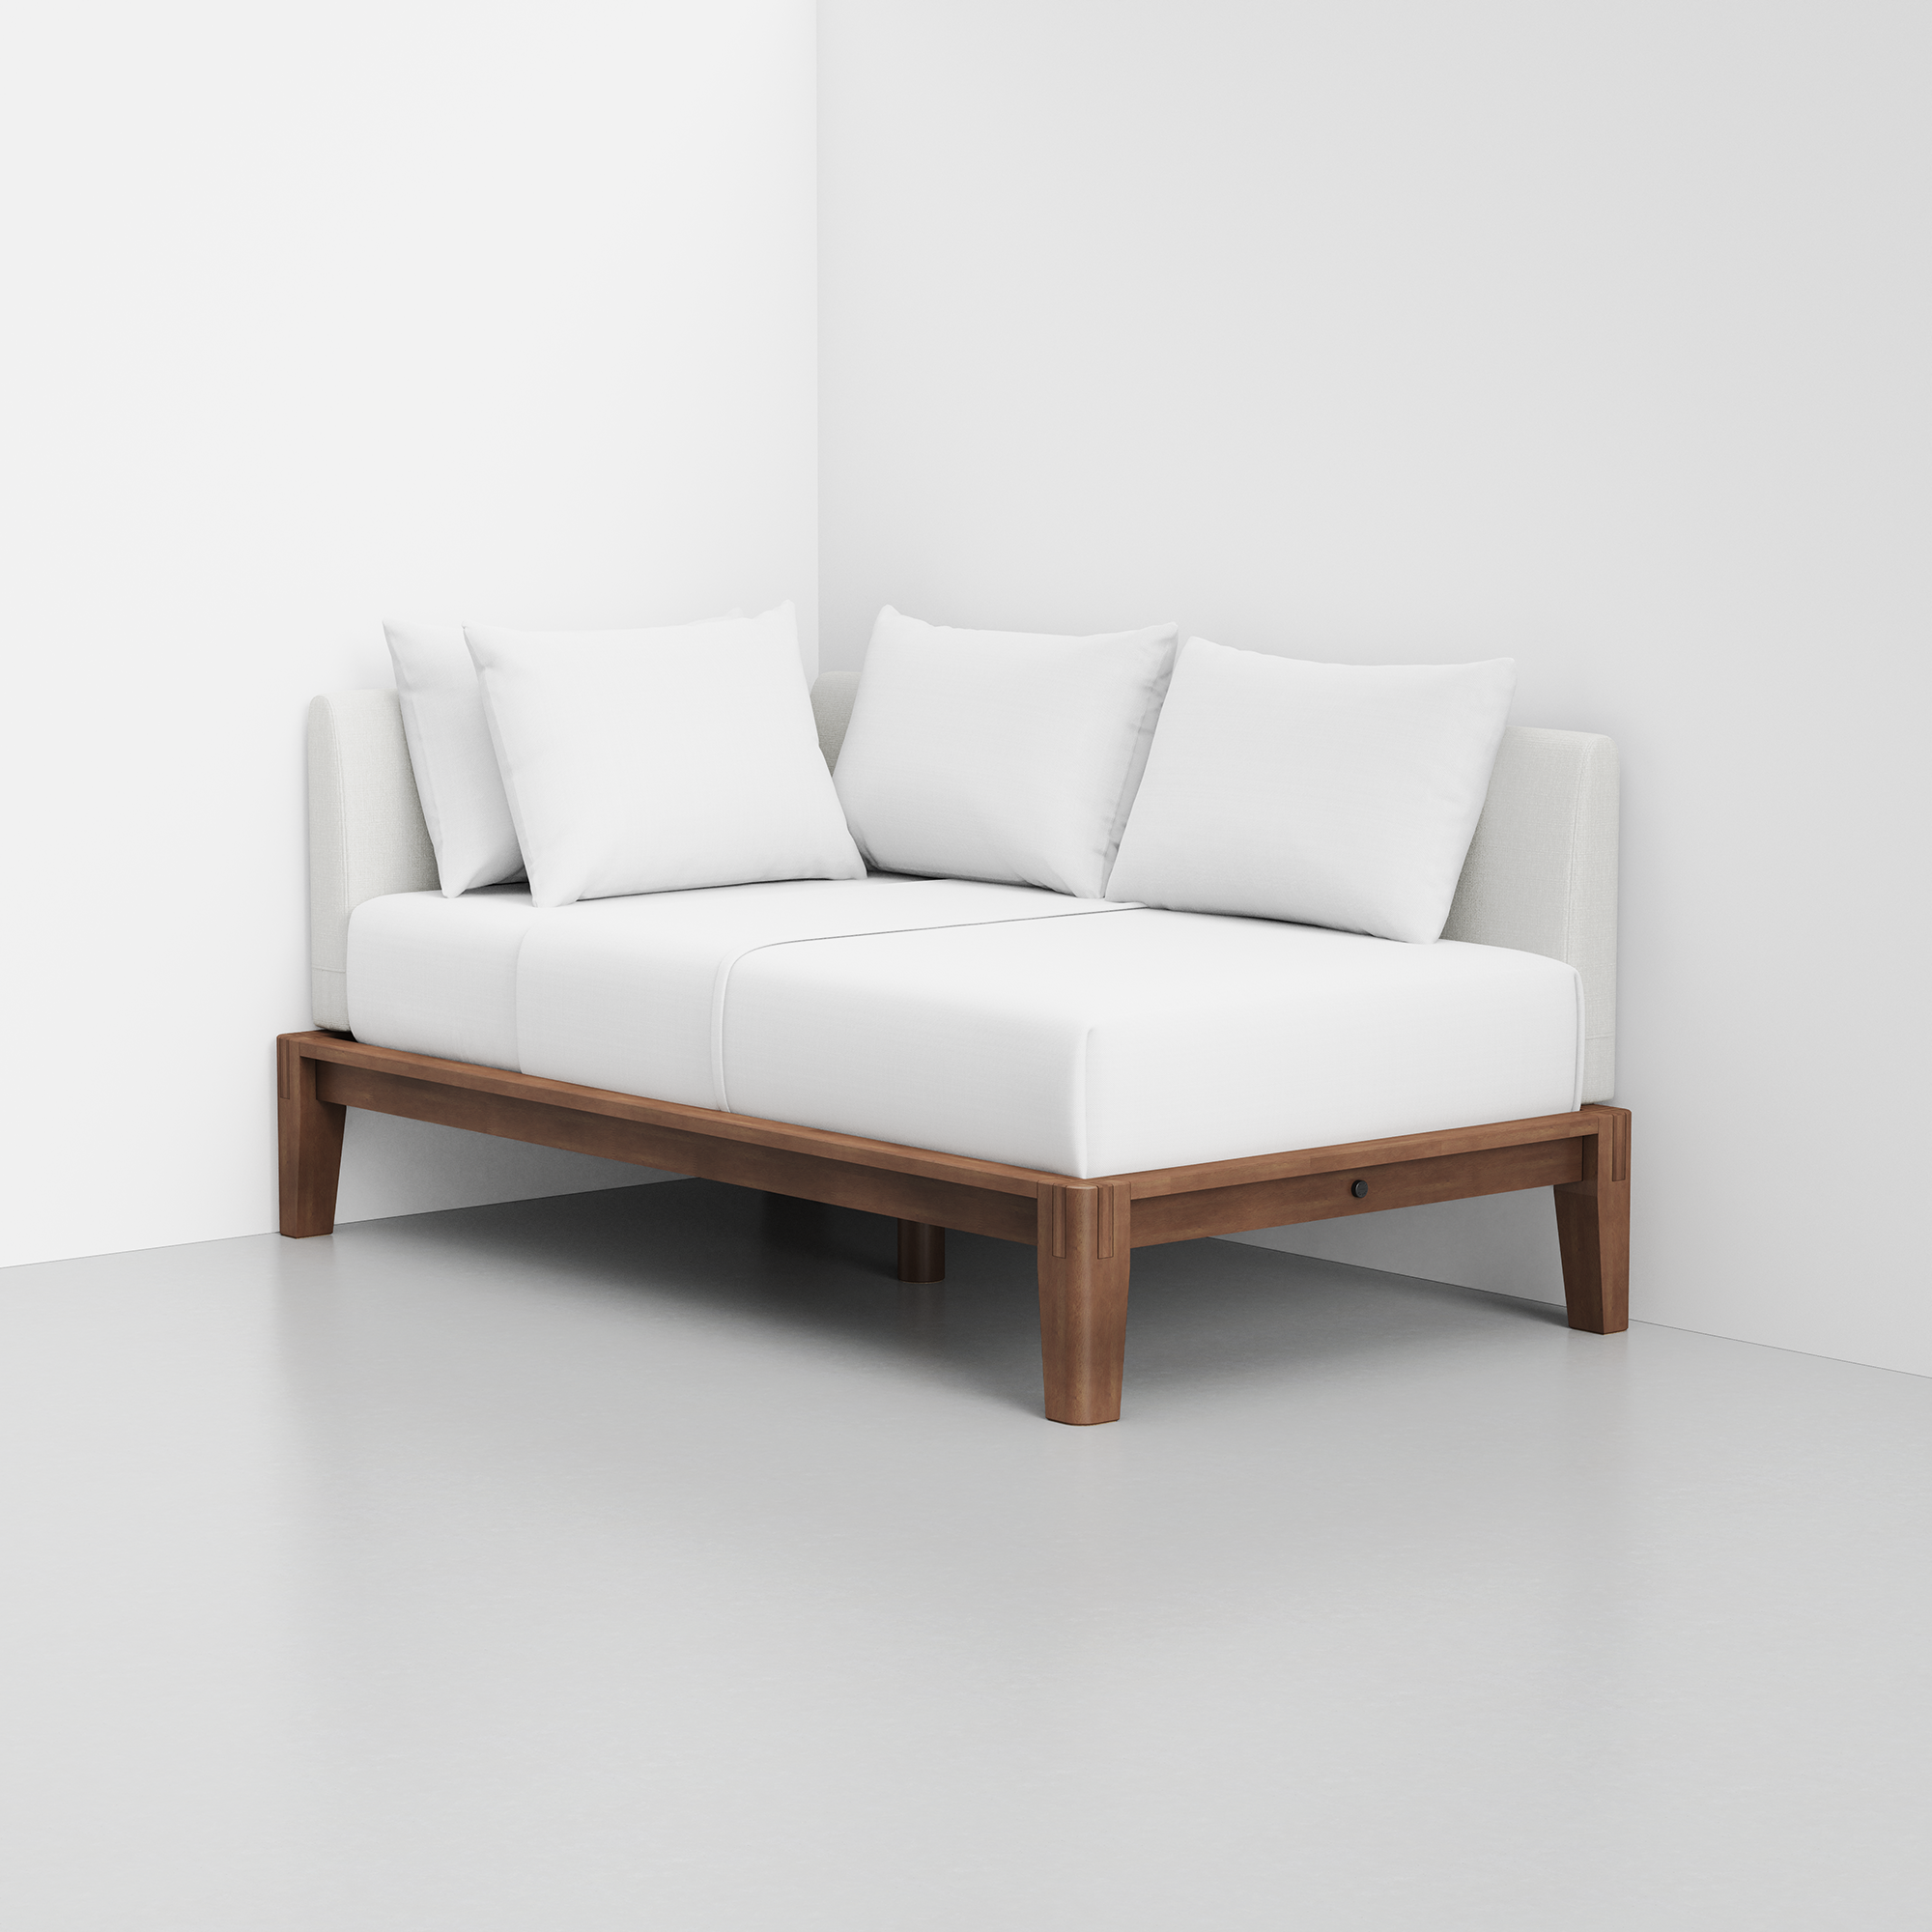 PDP Image: The Daybed (Walnut / Light Linen) - Rendering - Pillows